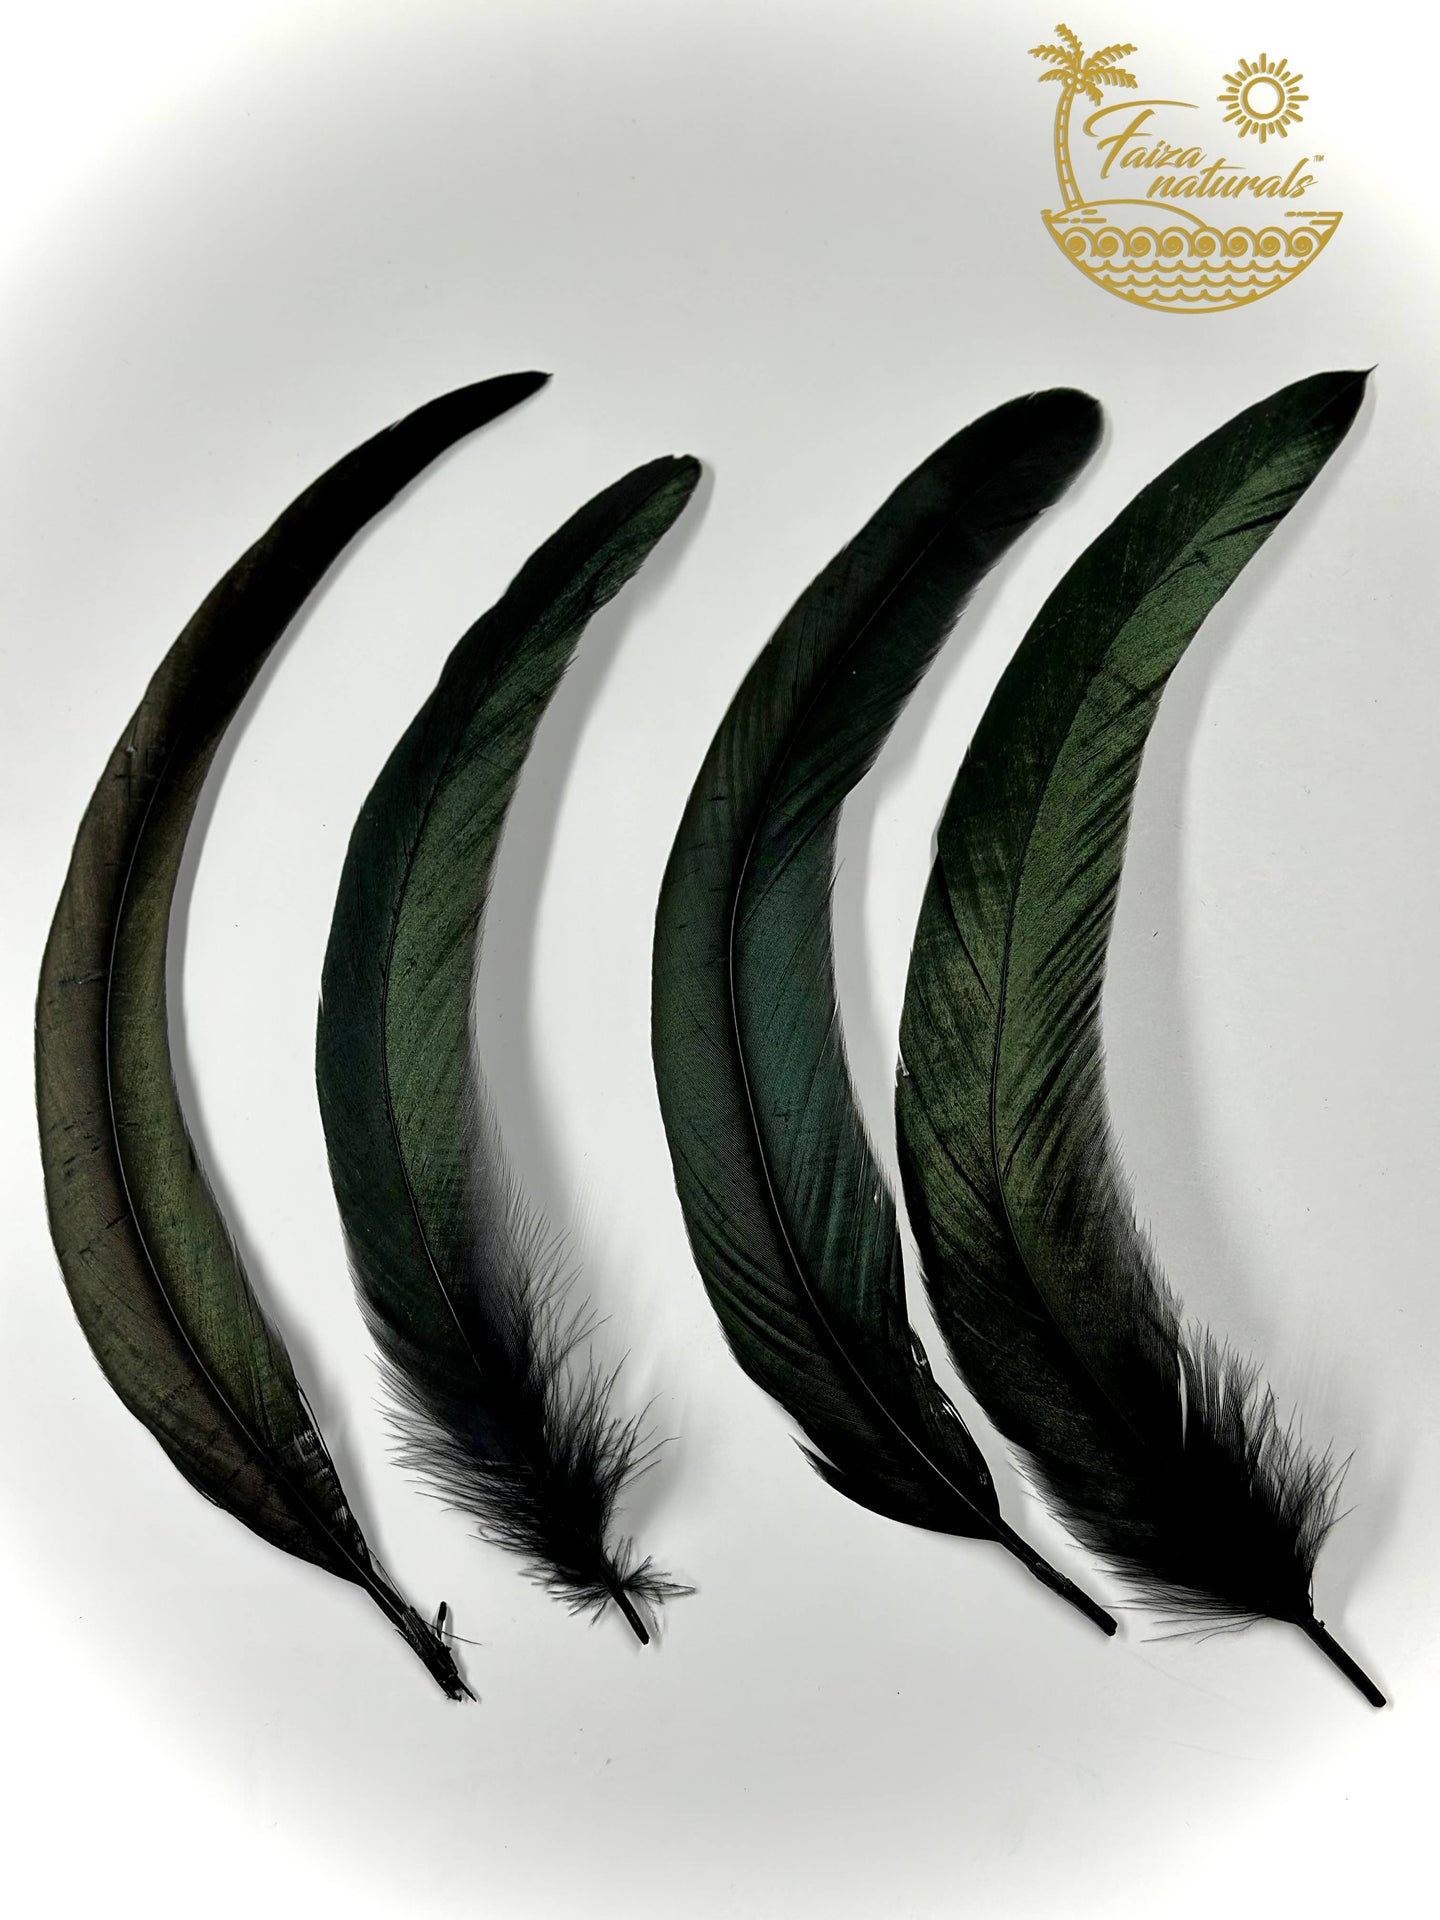 Crow Feathers for Smudging